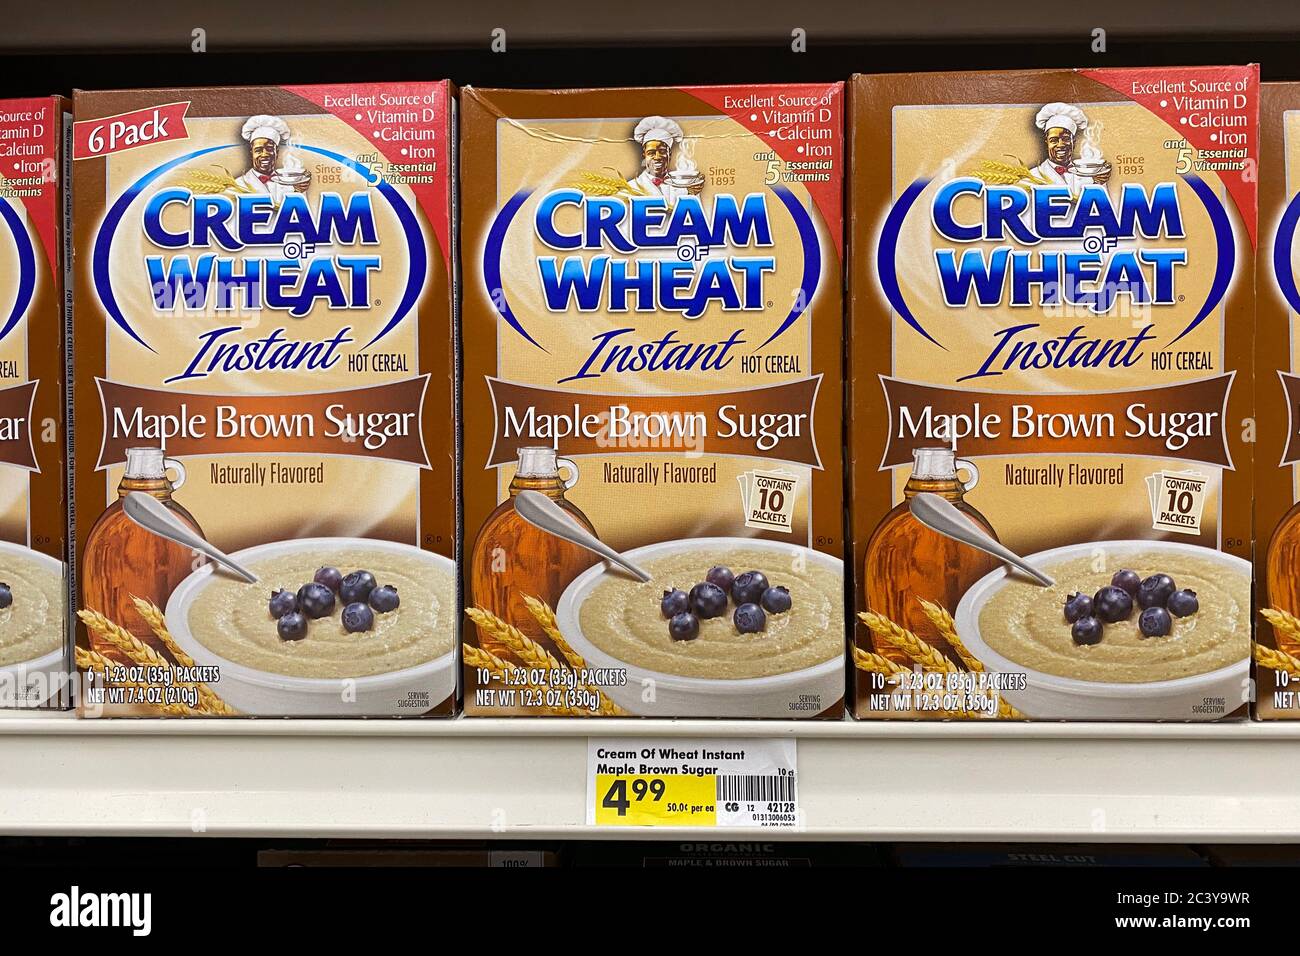 https://c8.alamy.com/comp/2C3Y9WR/cream-of-wheat-original-maple-brown-sugar-boxes-are-seen-monday-june-22-2020-in-montebello-calif-the-maker-of-the-breakfast-porridge-farina-mix-bg-foods-based-in-parsippany-new-jersey-is-conducting-an-immediate-review-of-its-logo-first-seen-in-1893-of-an-african-american-chef-produced-by-emery-mapes-the-character-was-named-rastus-and-was-developed-by-artist-edward-v-brewer-rastus-was-included-on-all-boxes-and-advertisements-it-has-long-been-thought-that-a-chef-named-frank-l-white-was-the-model-for-the-chef-shown-on-the-cream-of-wheat-box-photo-via-newscom-2C3Y9WR.jpg